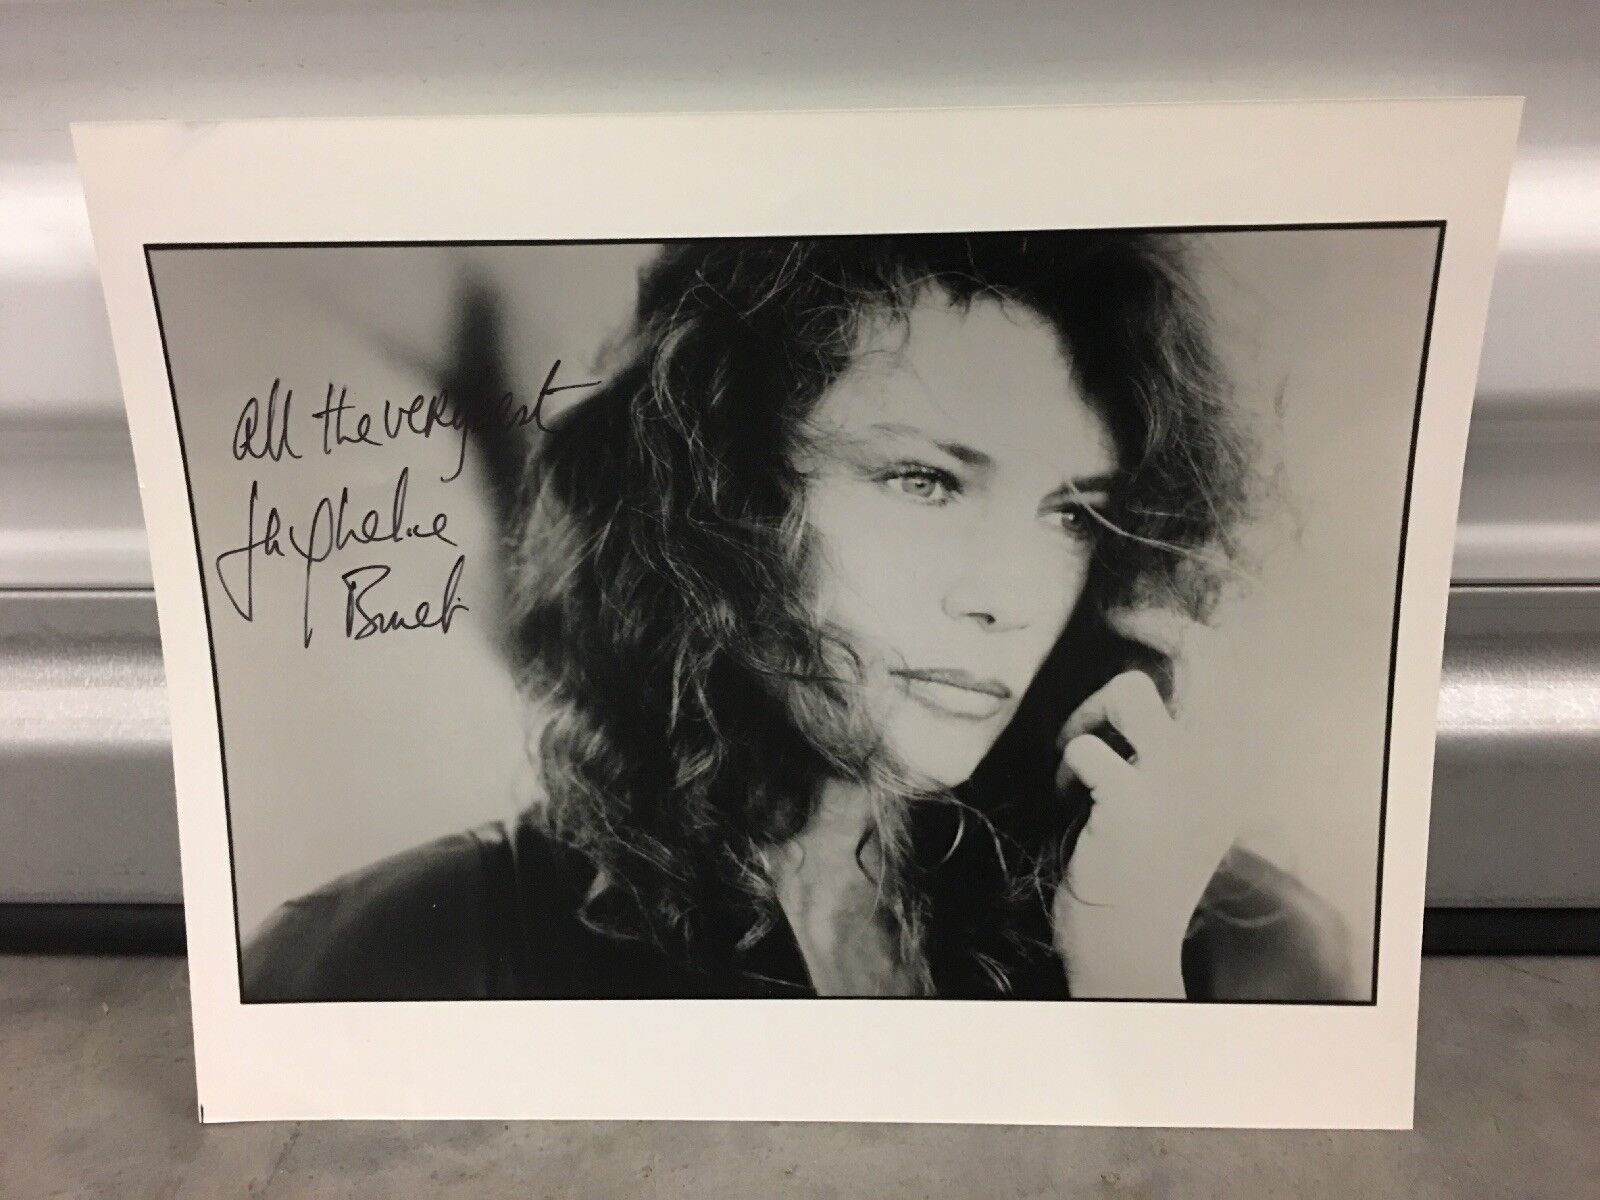 Jacqueline Bisset Sexy Signed Autographed 8x10 Photo Poster painting PSA or BAS Guaranteed